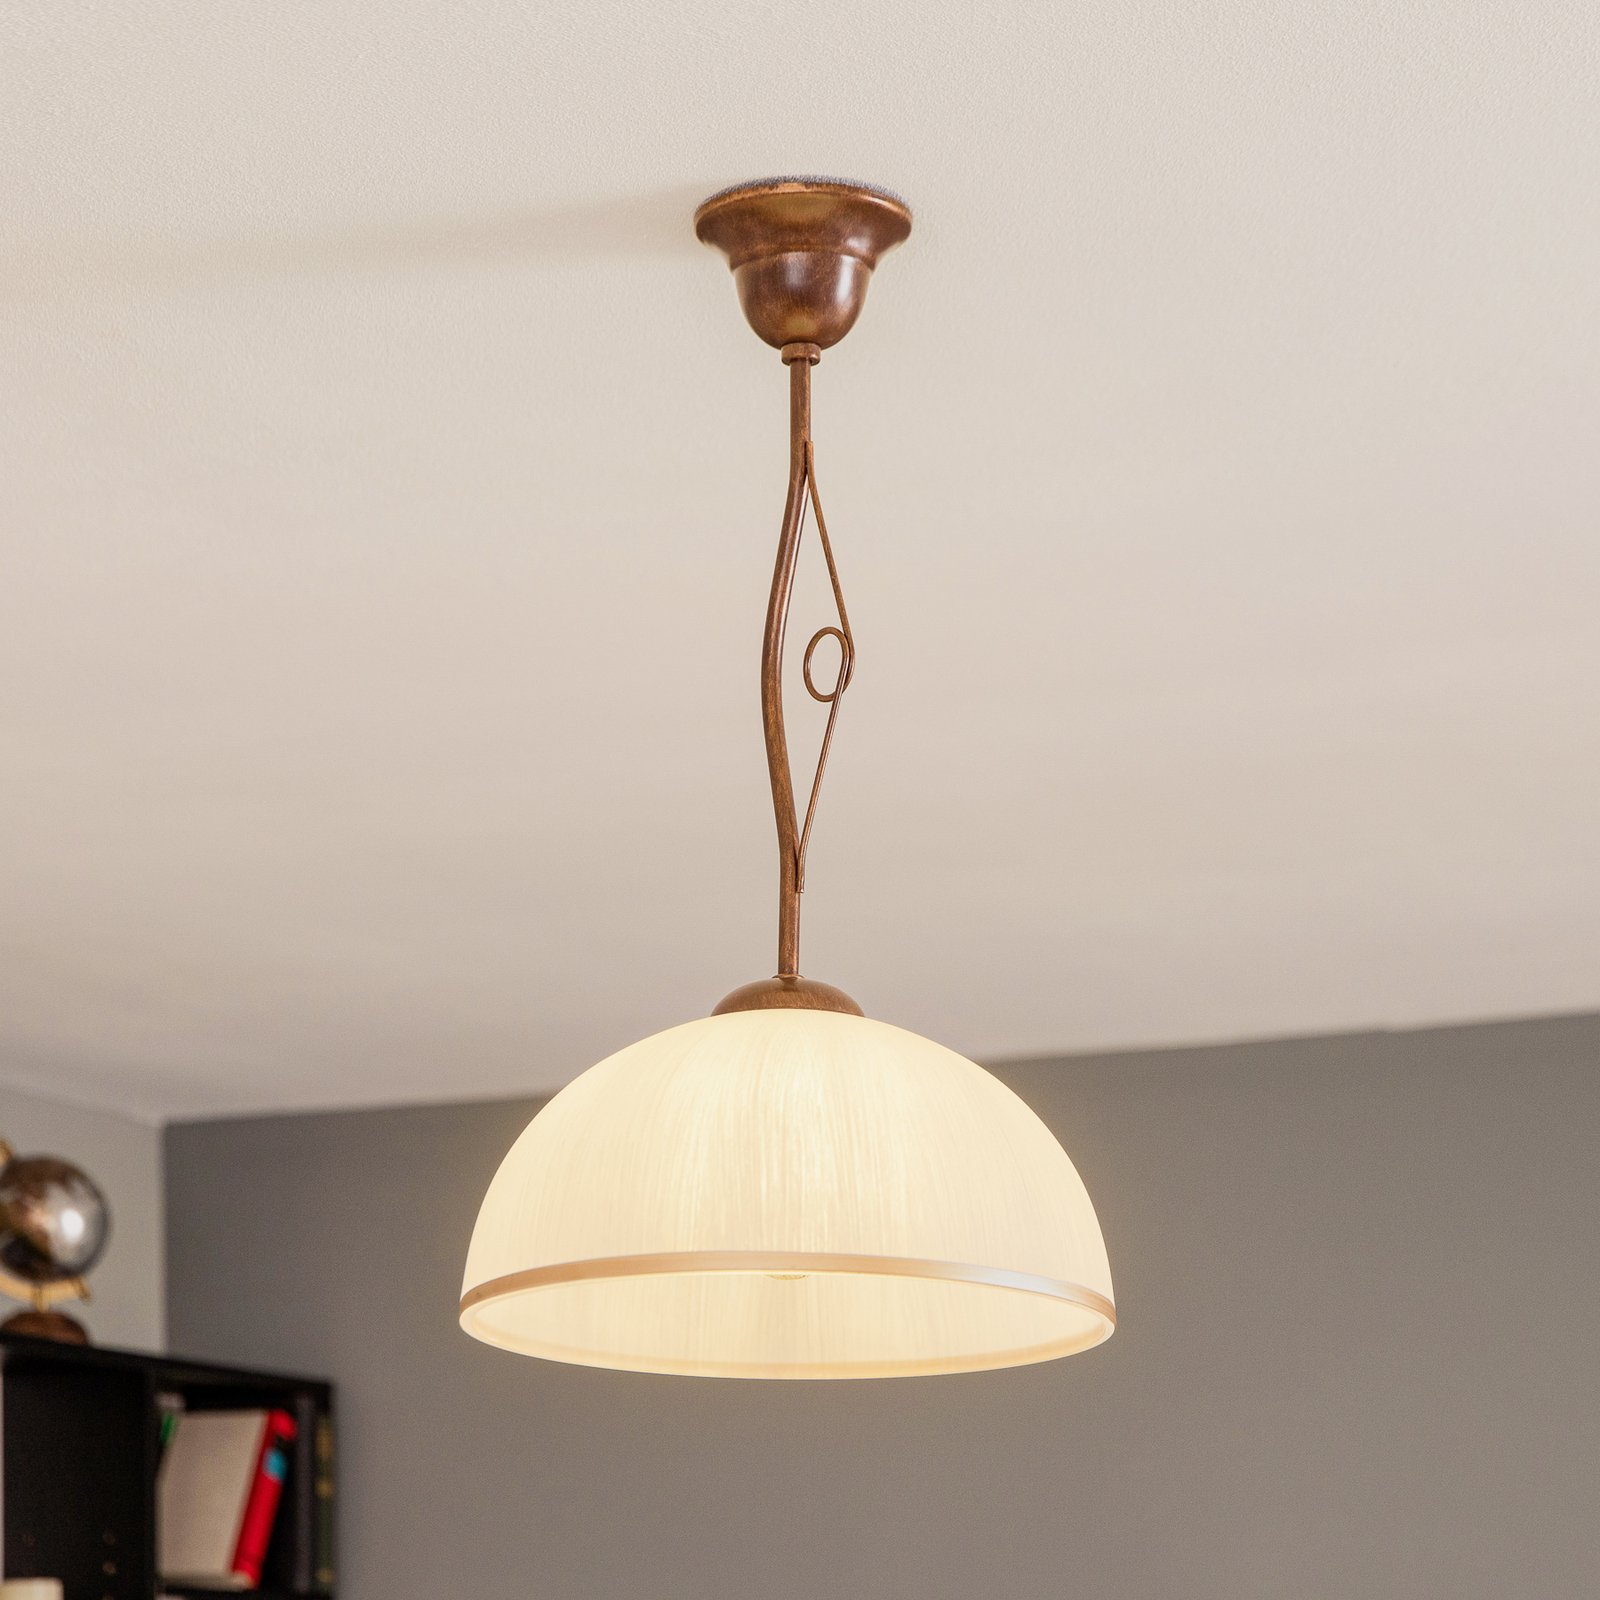 Roma hanging light in white and brown, one-bulb